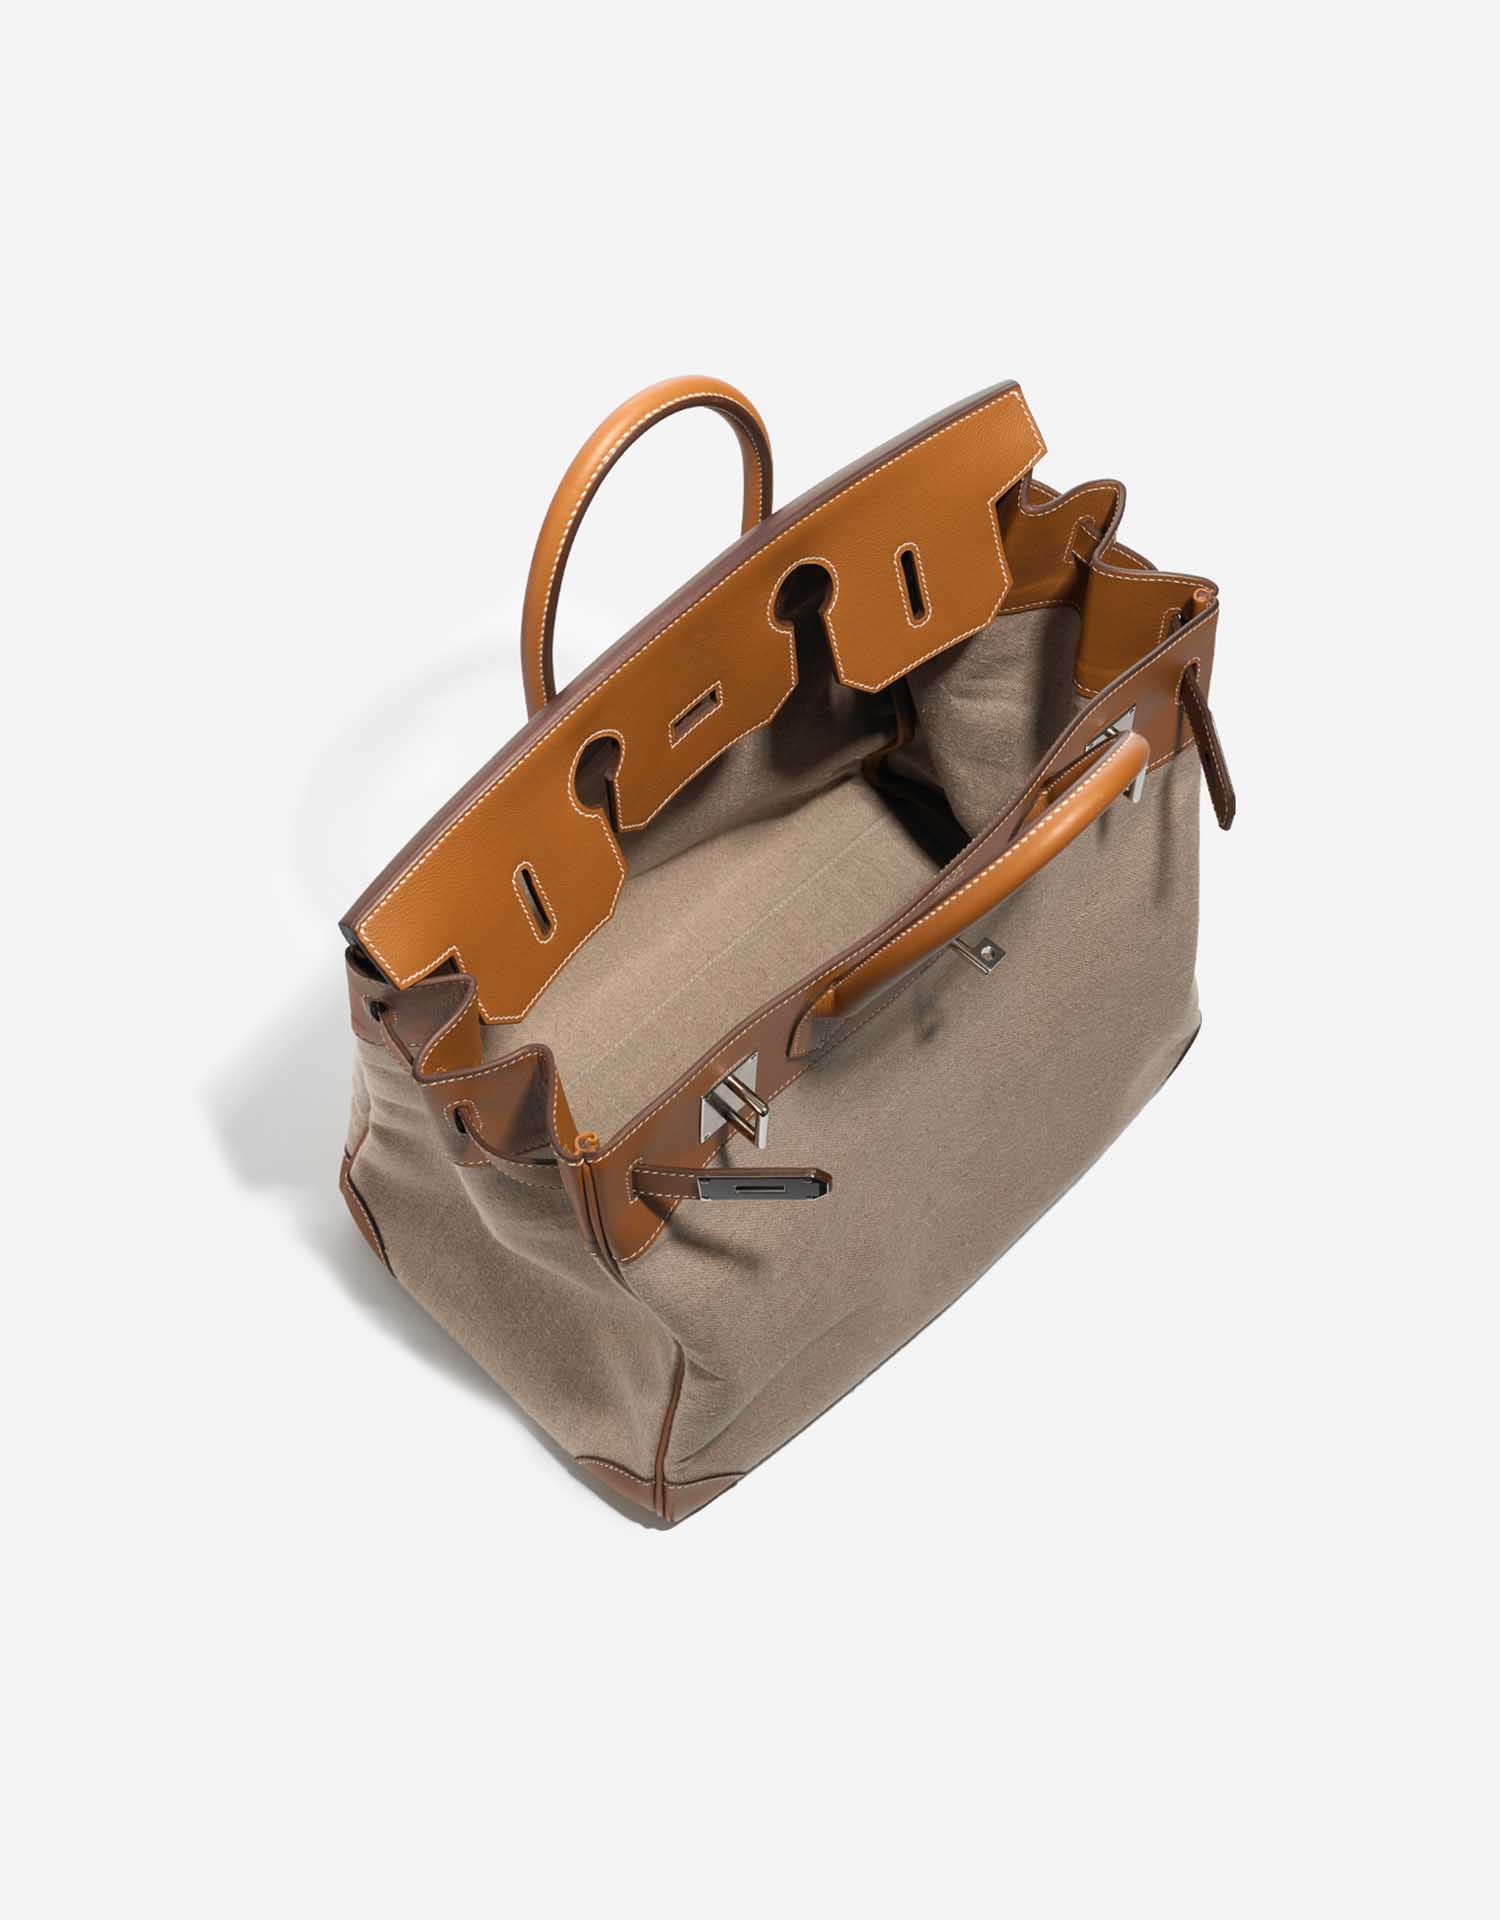 The Hermès Haut à Courroies Is More Than Just A Heritage Bag